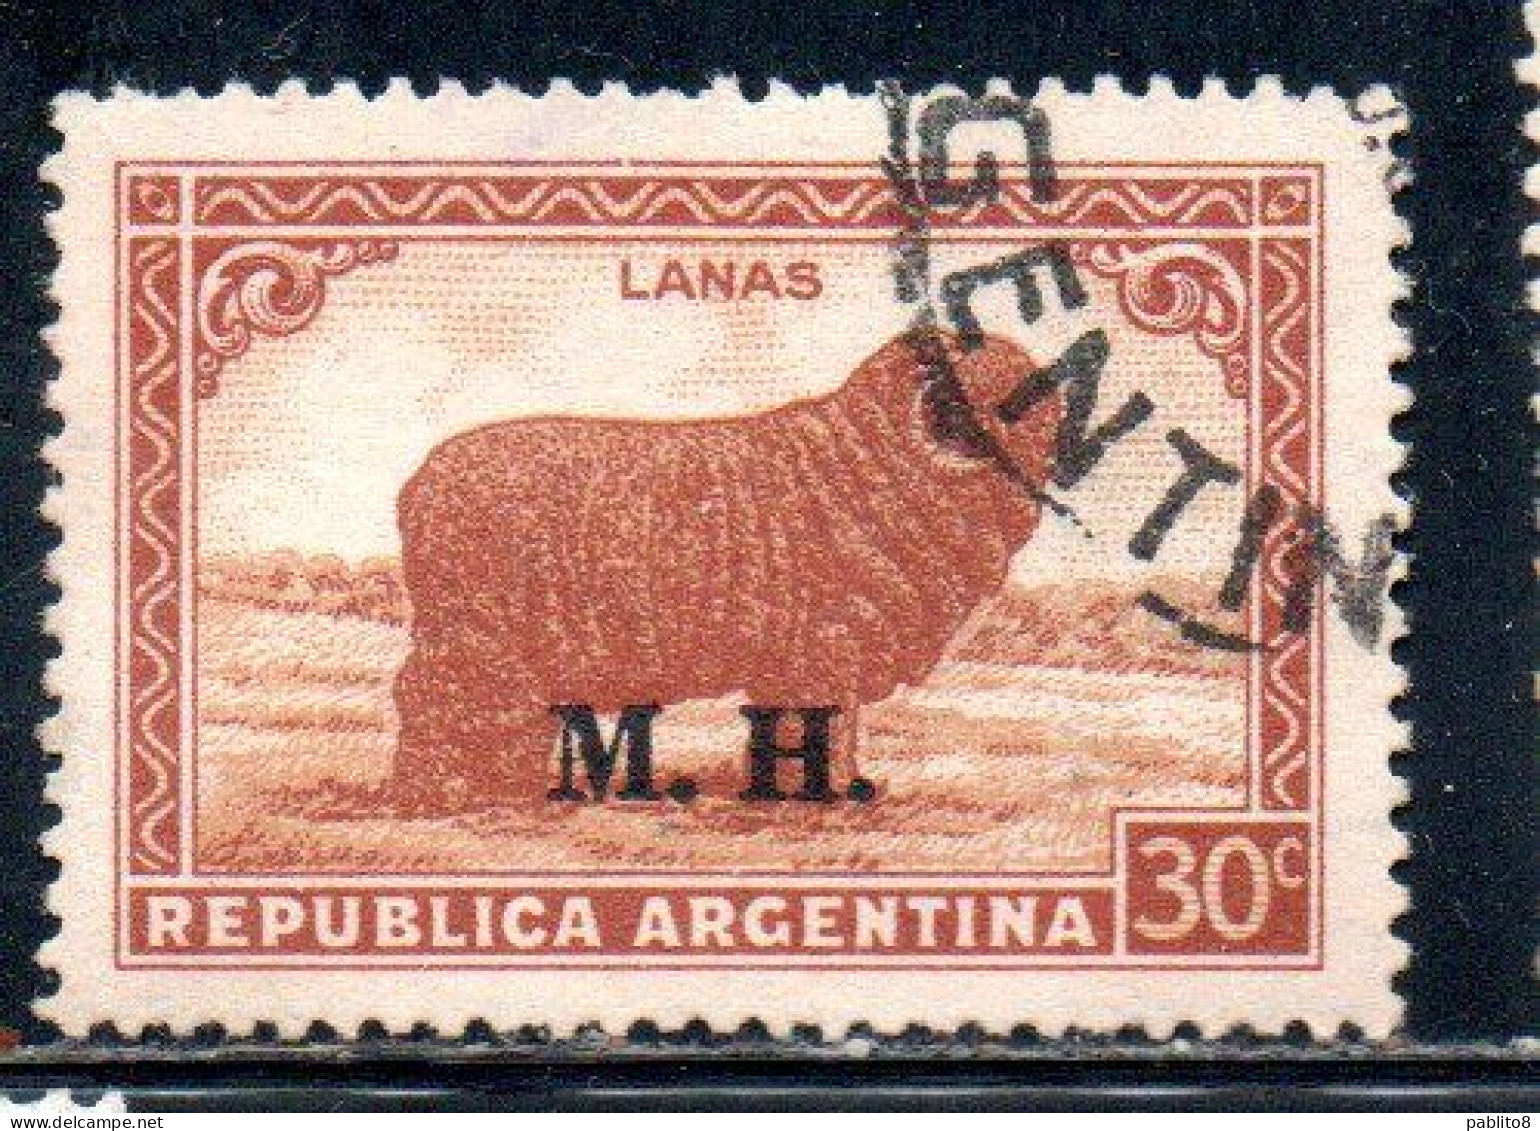 ARGENTINA 1935 1937 OFFICIAL DEPARTMENT STAMP OVERPRINTED M.H. MINISTRY OF FINANCE MH 30c USED USADO - Officials